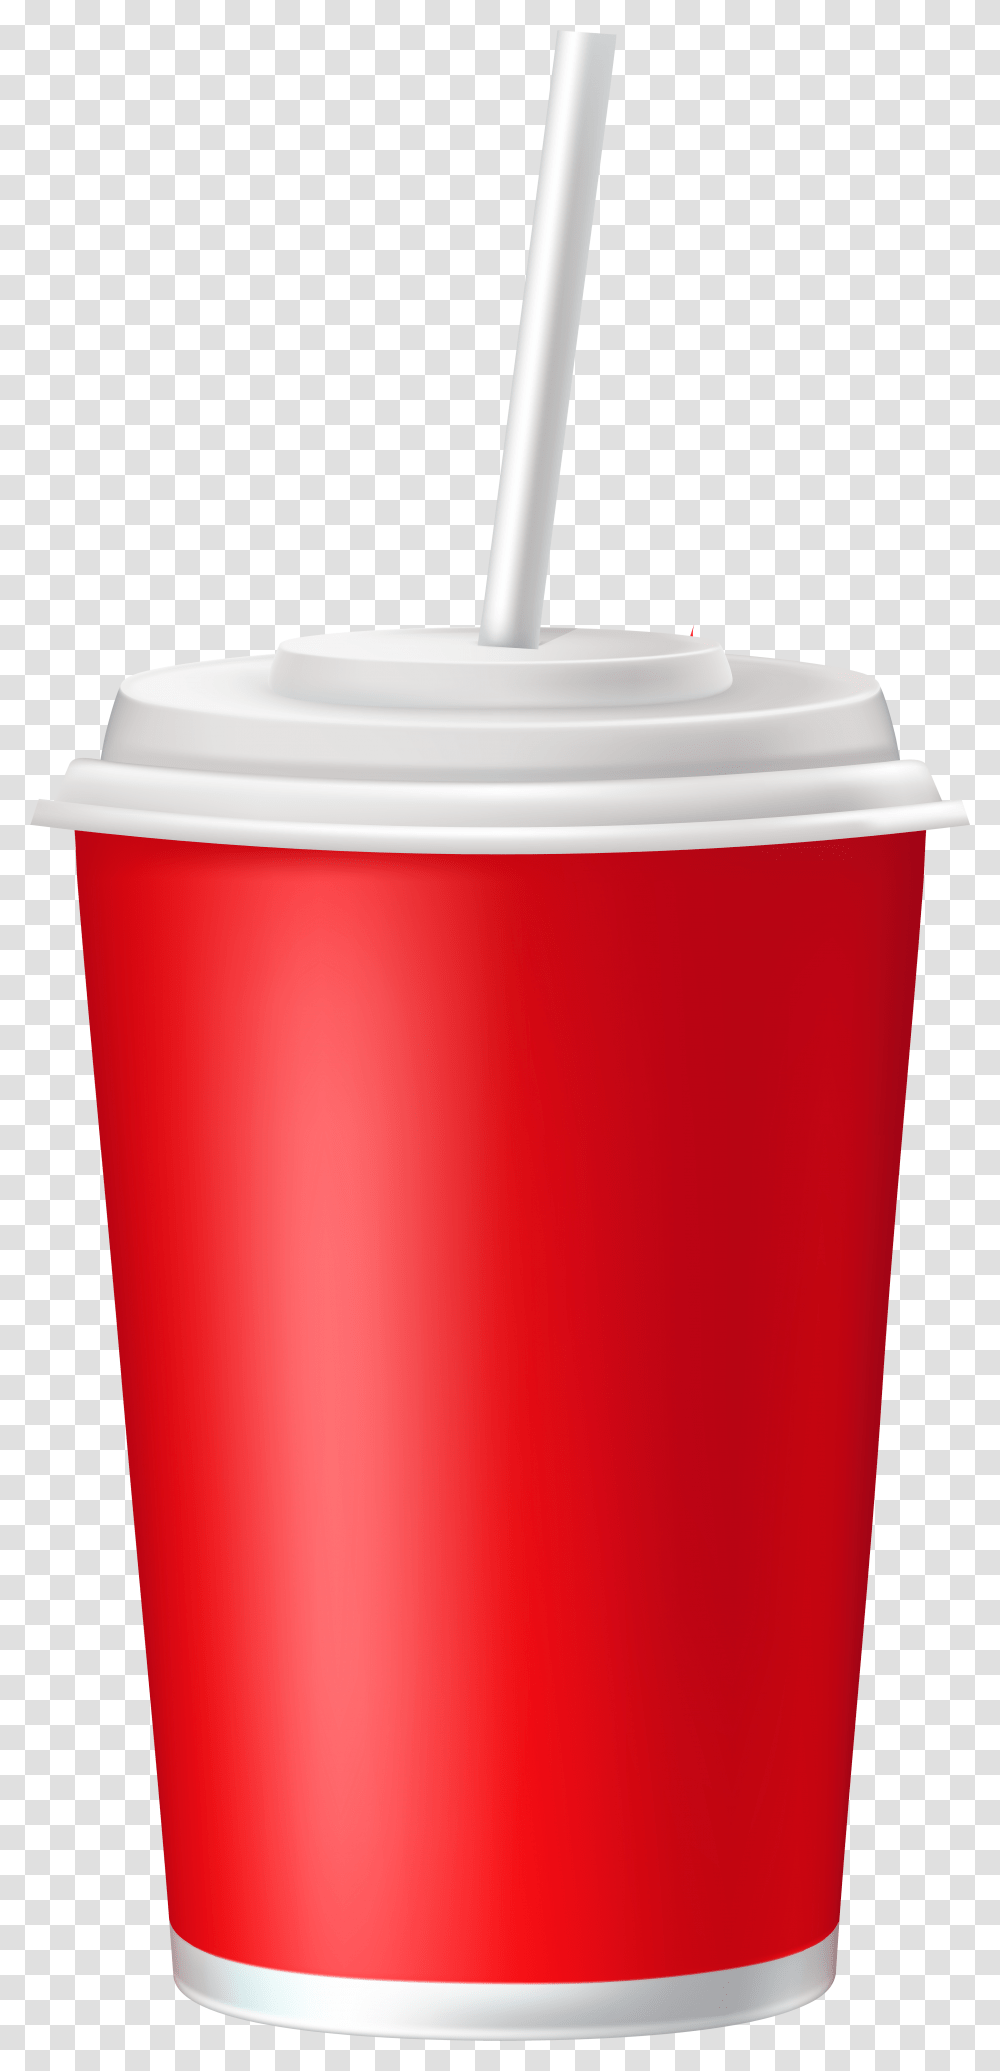 Cup Clipart Straw Cup And Straw Clipart, Jar, Pottery, Milk, Beverage Transparent Png